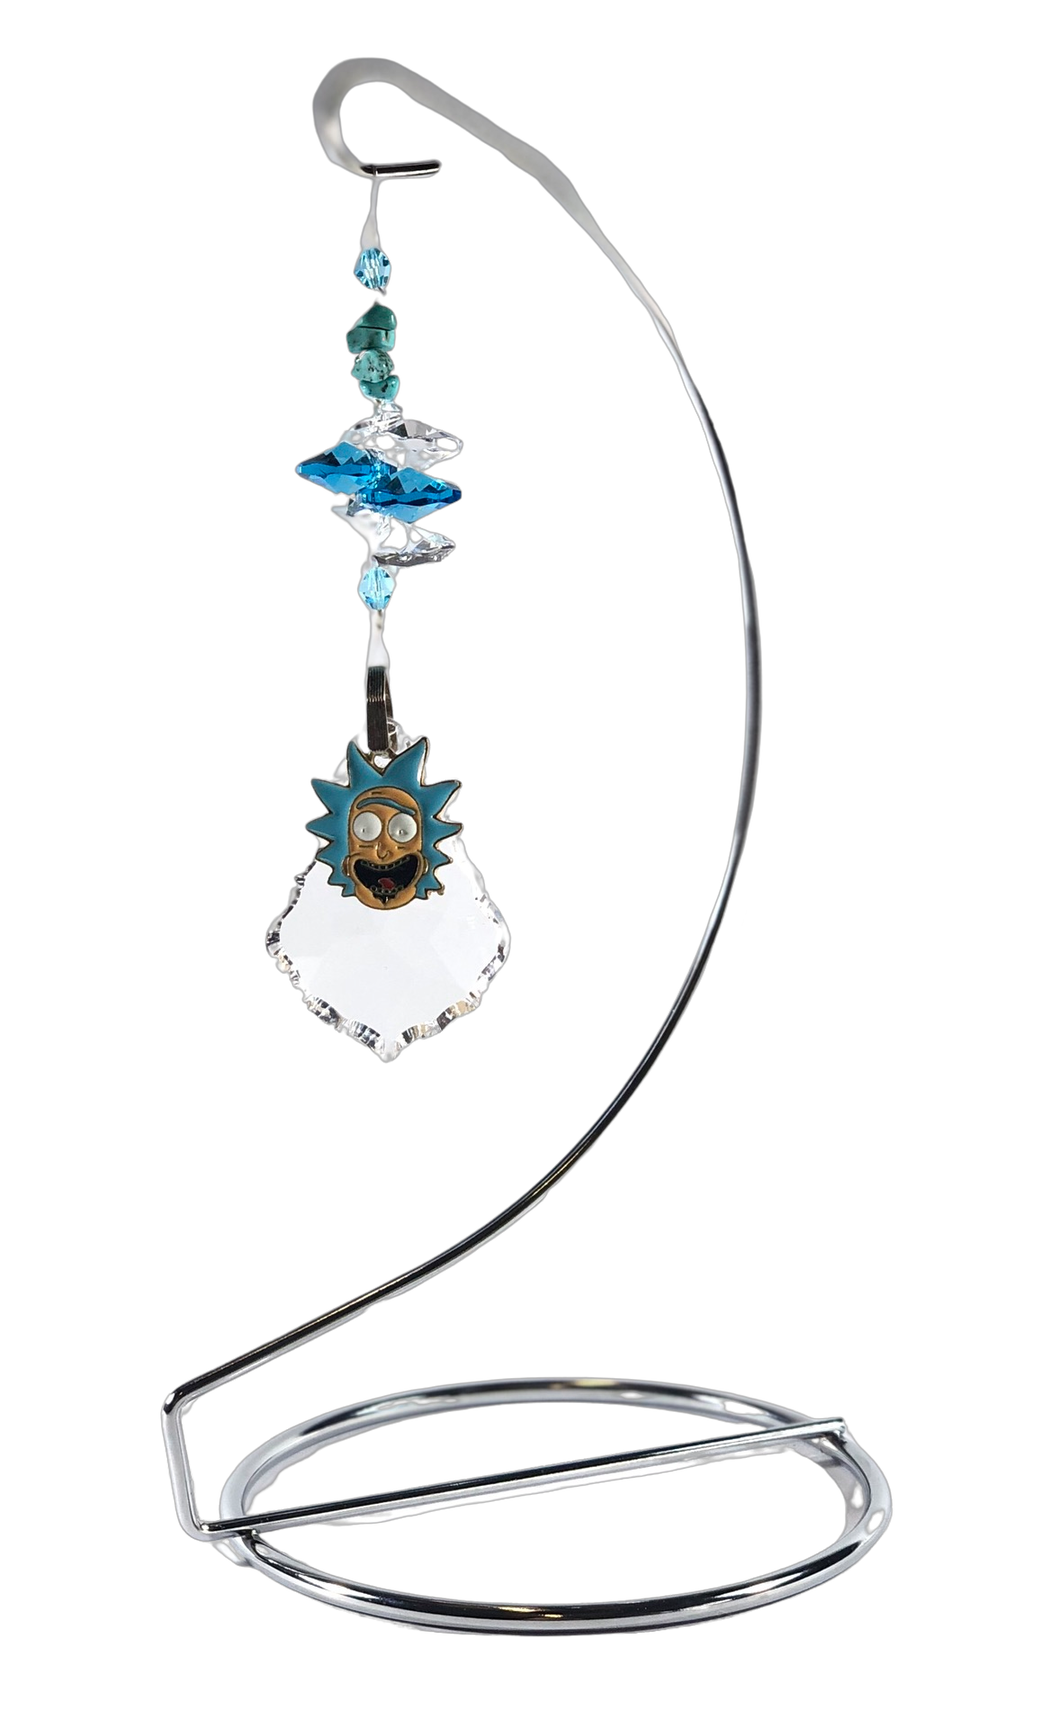 Rick & Morty - crystal suncatcher is decorated with turquoise gemstones and come on this amazing stand.